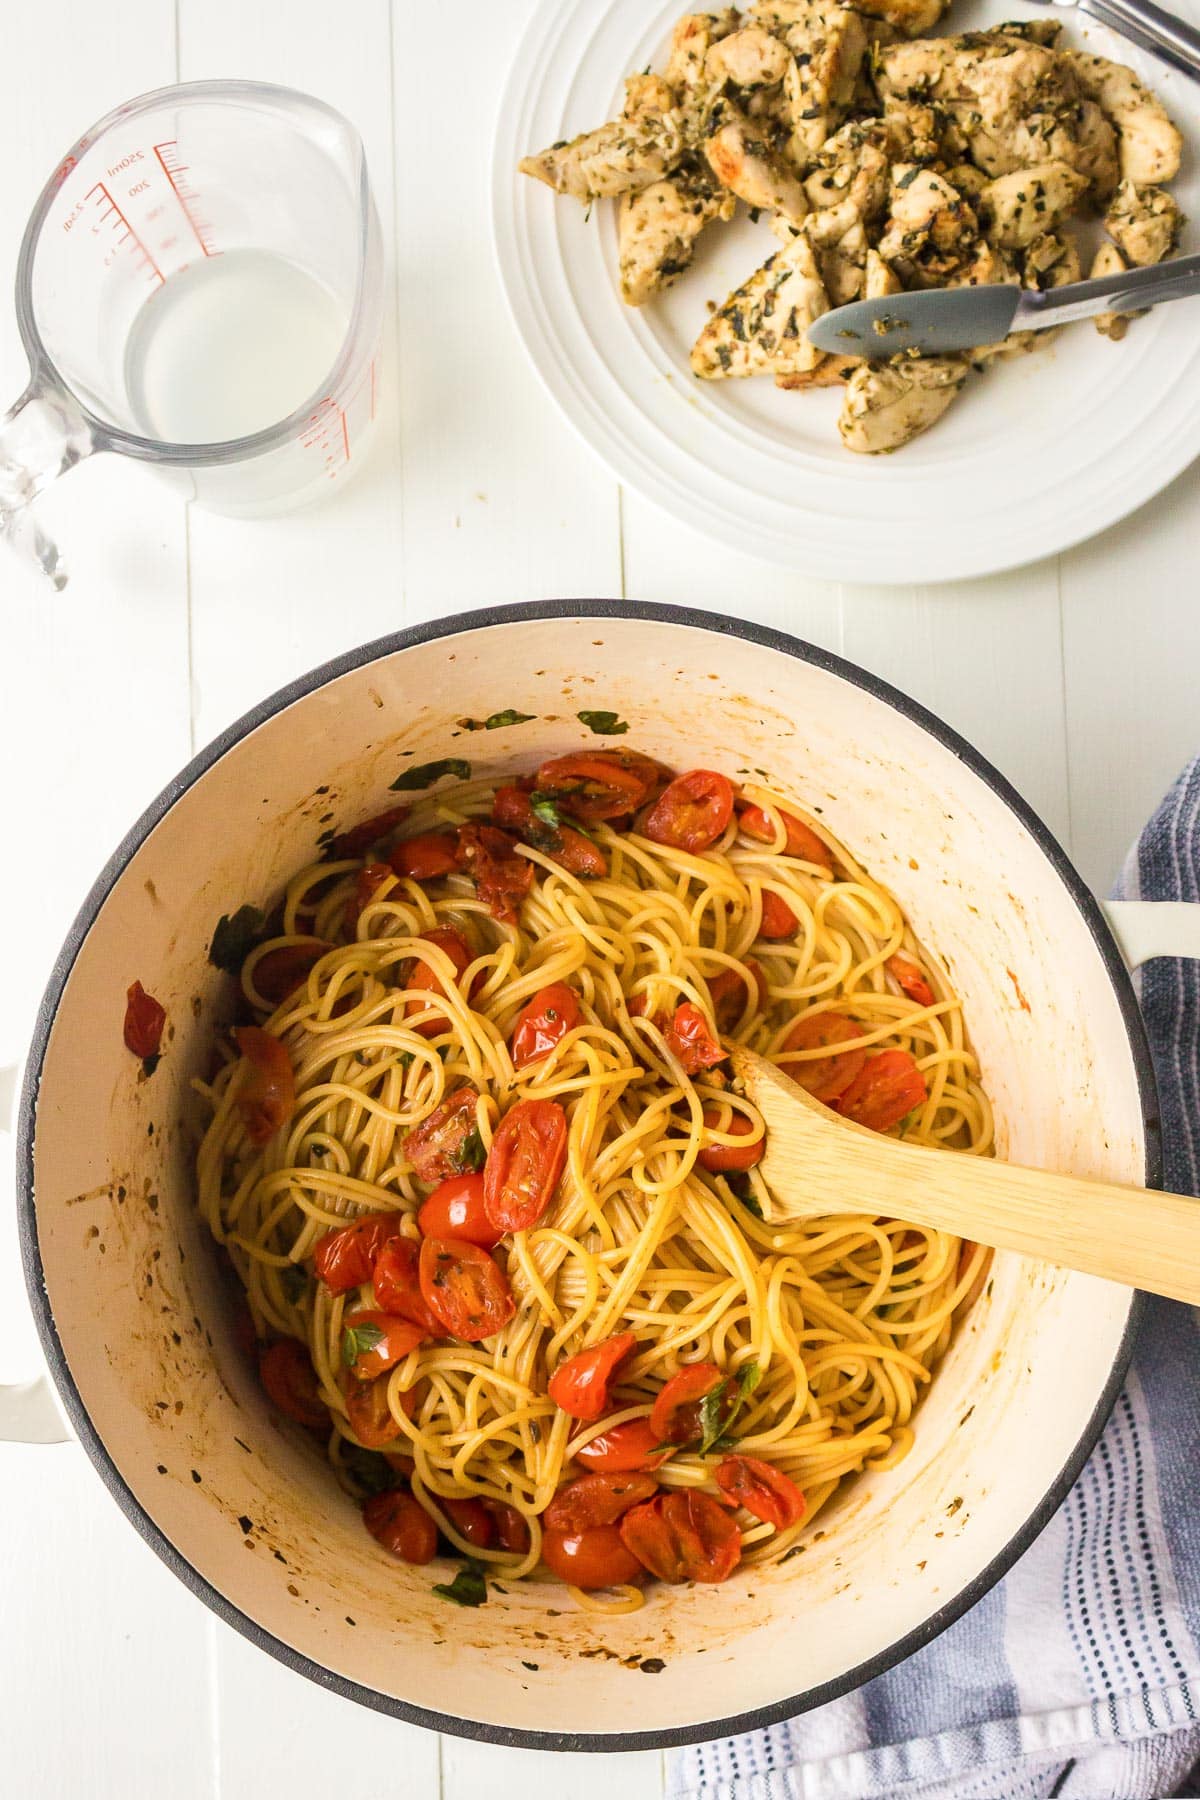 A pot of spaghetti with cherry tomatoes and herbs, with a plate of cooked chicken bruschetta nearby.